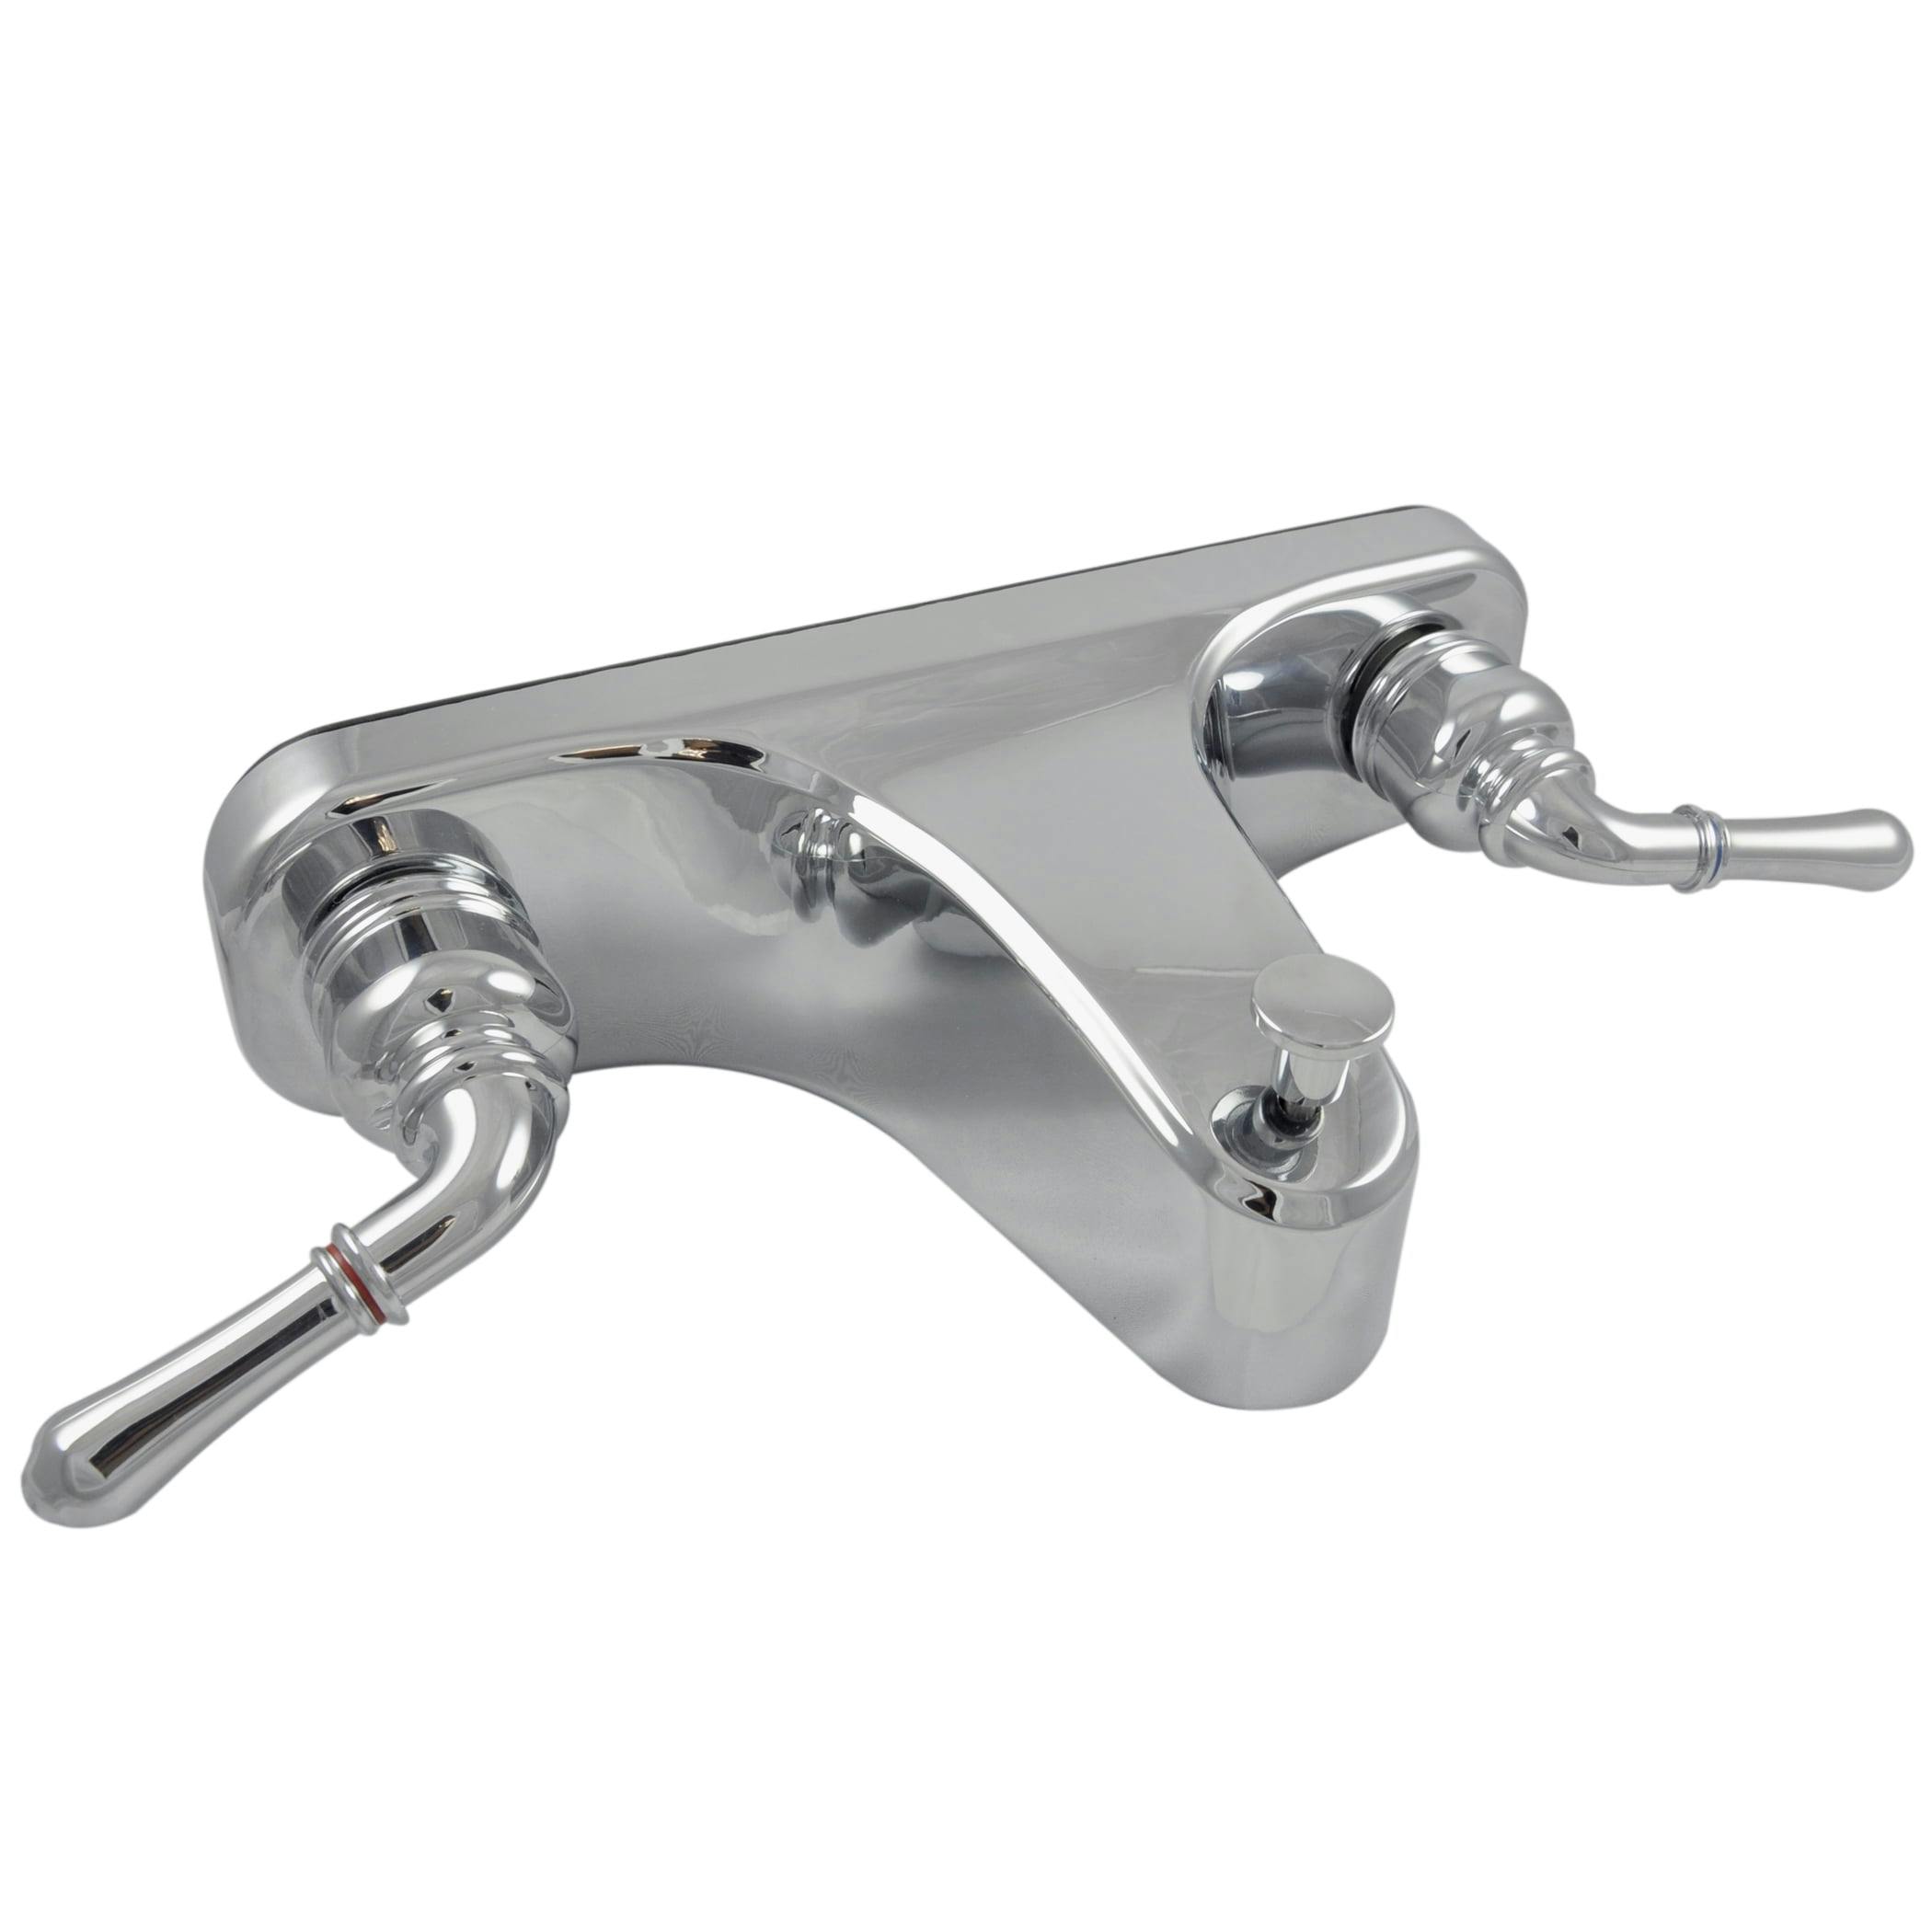 Modern Chrome Deck Mount Tub/Shower Faucet with Dual Lever Handles